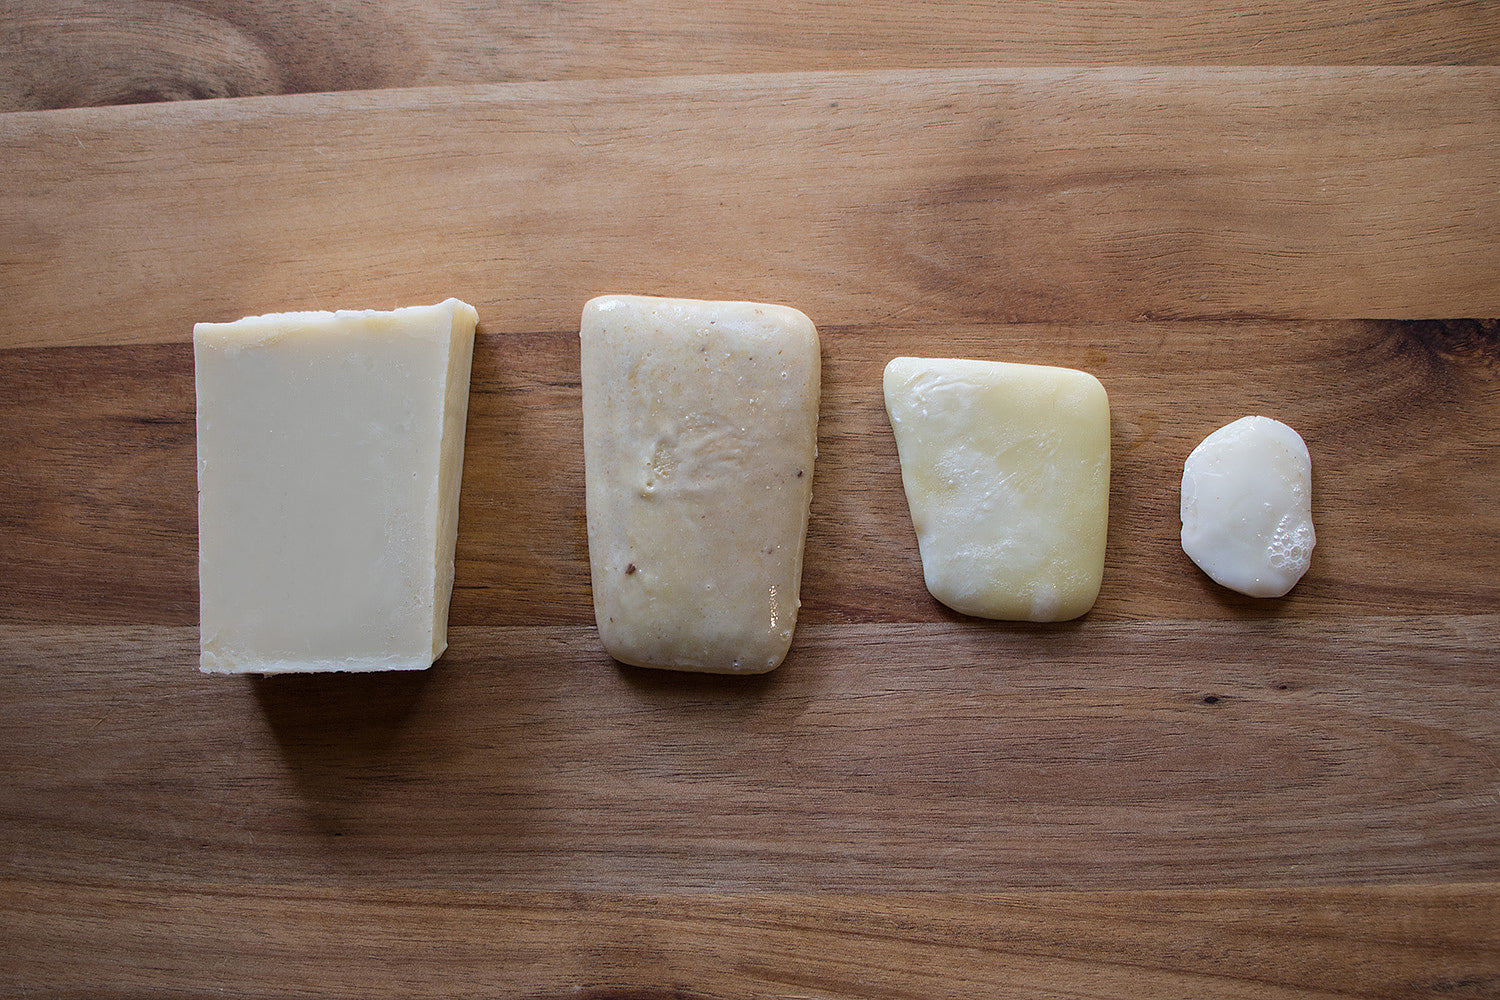 How to give a second life to our natural artisan soaps